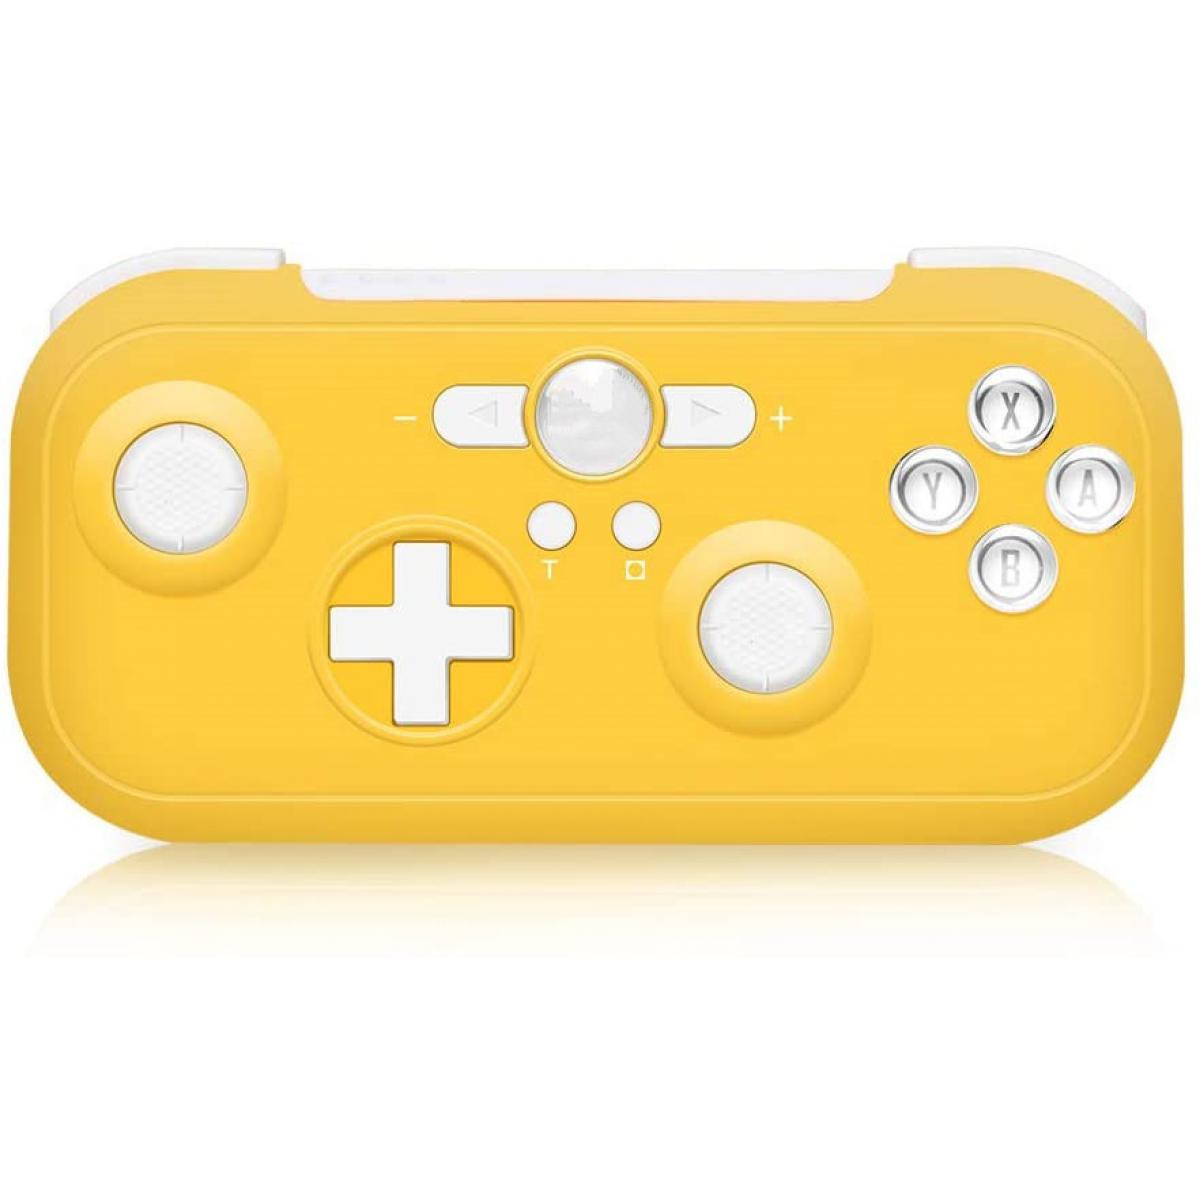 Manette retrogaming Chrono Manette Switch 6-Axis Sensor Double Shock Wireless Bluetooth Pro Manette Switch sans Fil pour Nintendo Switch Compatible avec Switch, Switch Lite, PS3, Steam（jaune）